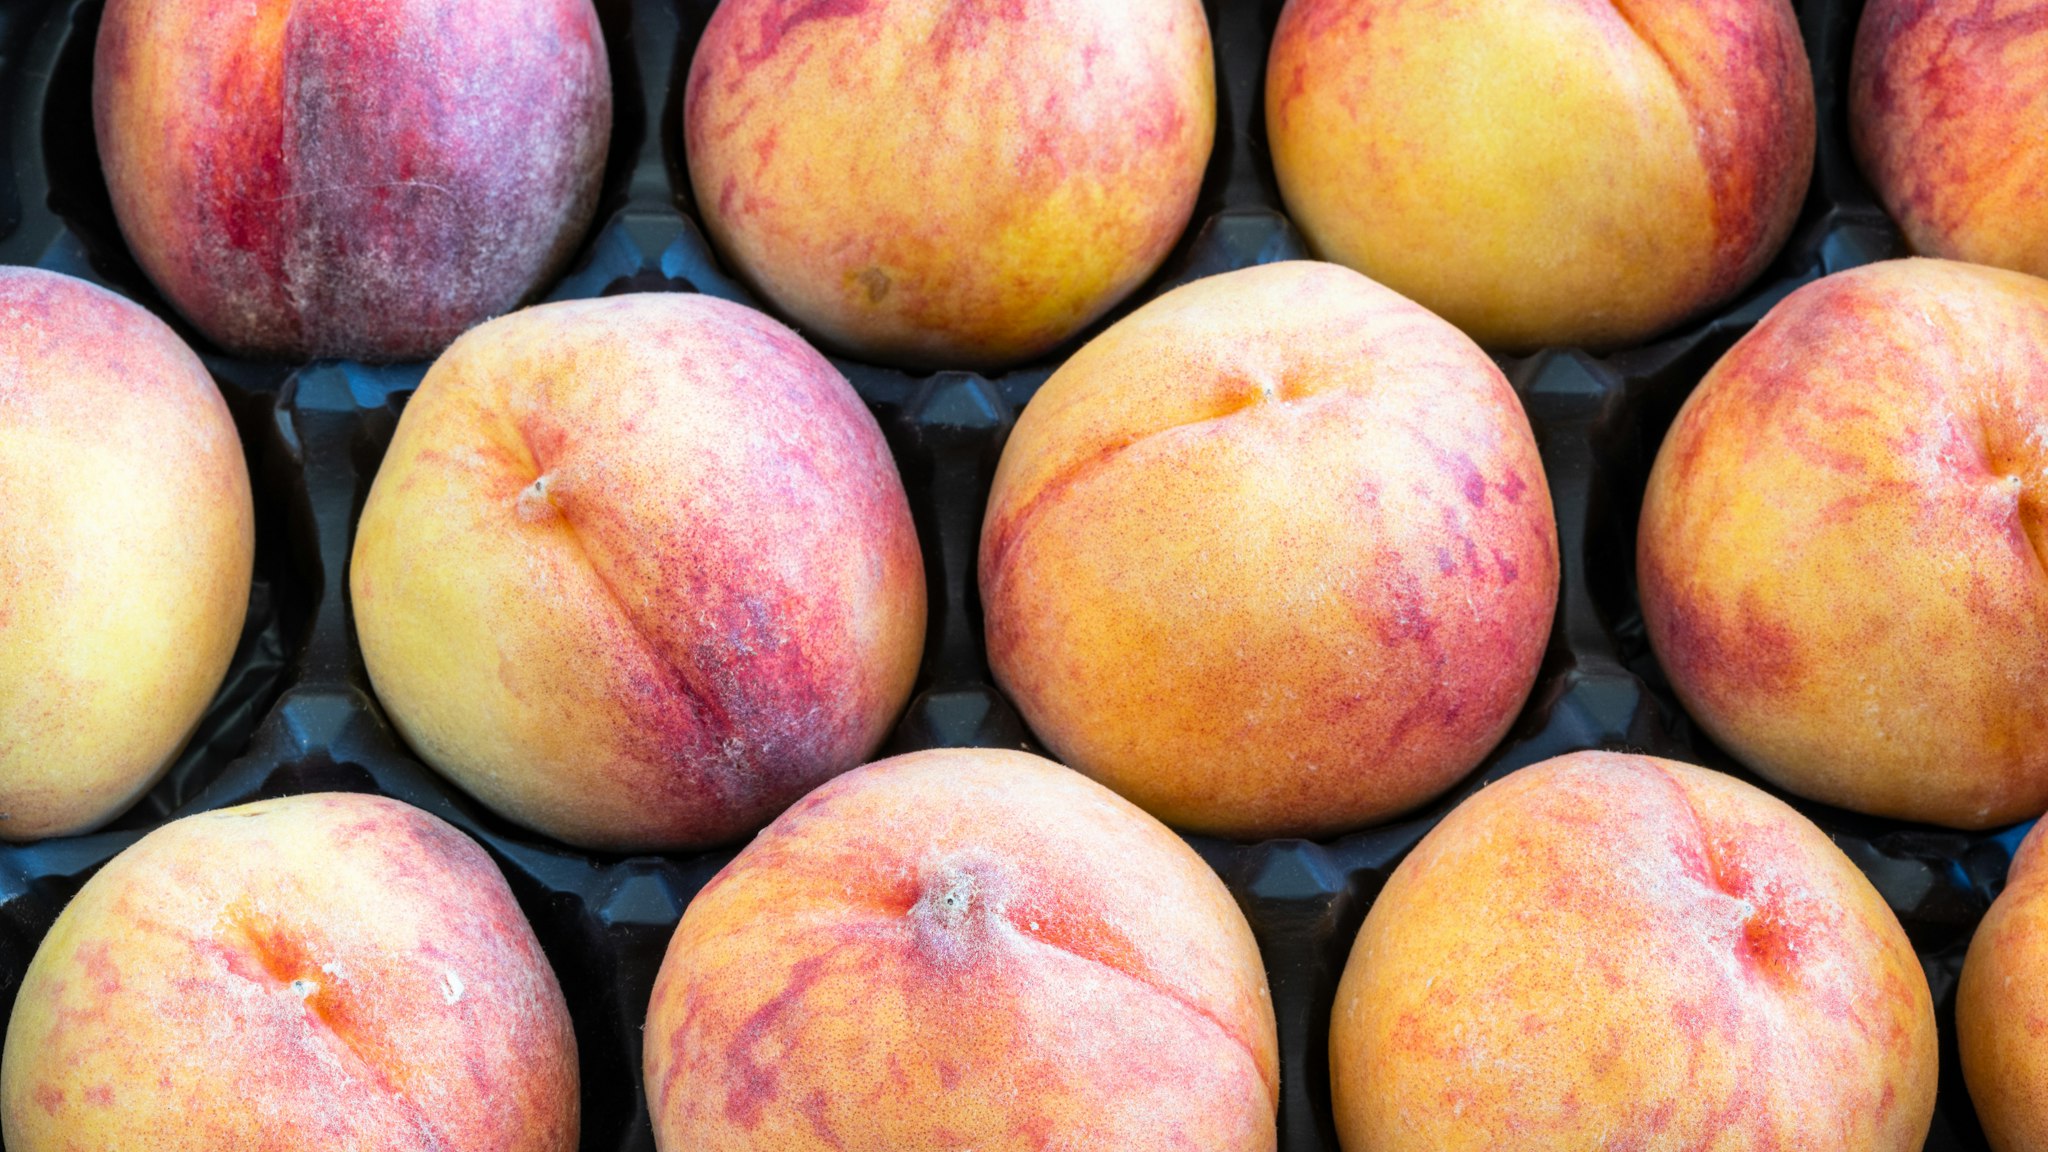 Large peaches forming a pattern inside of a box. Peaches are a healthy food because they are rich in potassium plus vitamins A, C, and E.